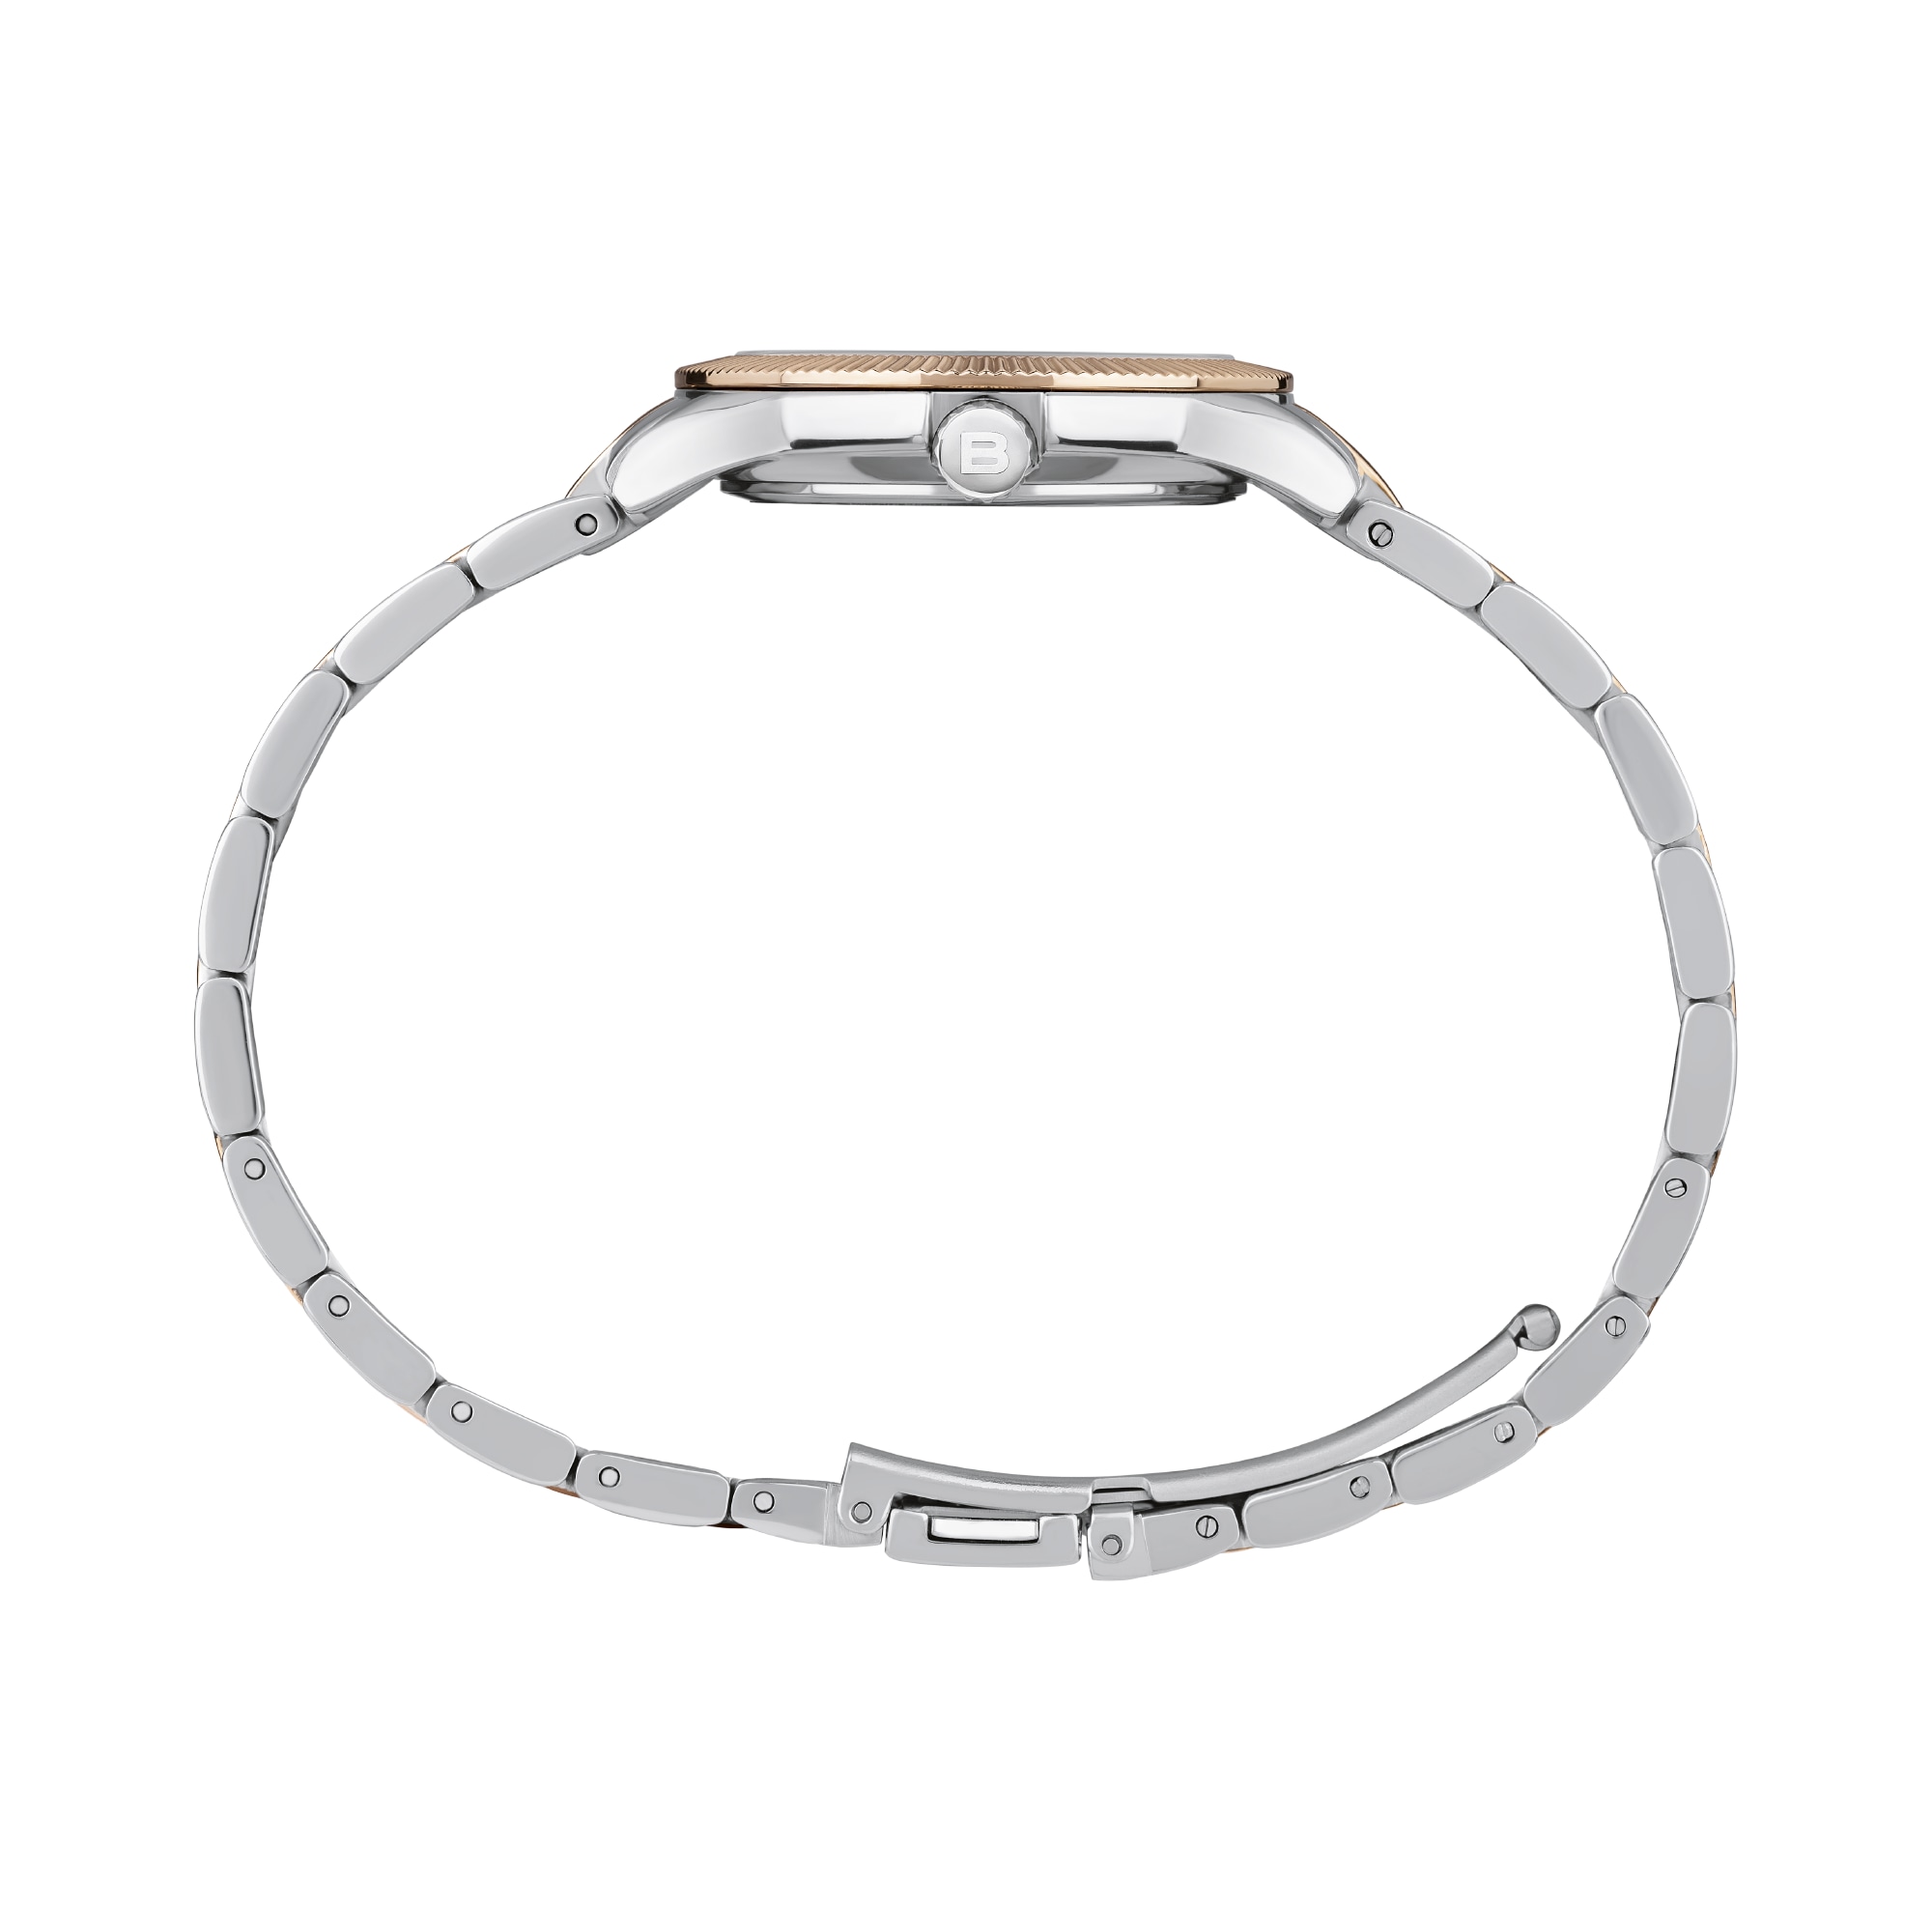 SHIMMERY - SOLO TEMPO LADY 31 MM - 2 - TW1939 | Breil